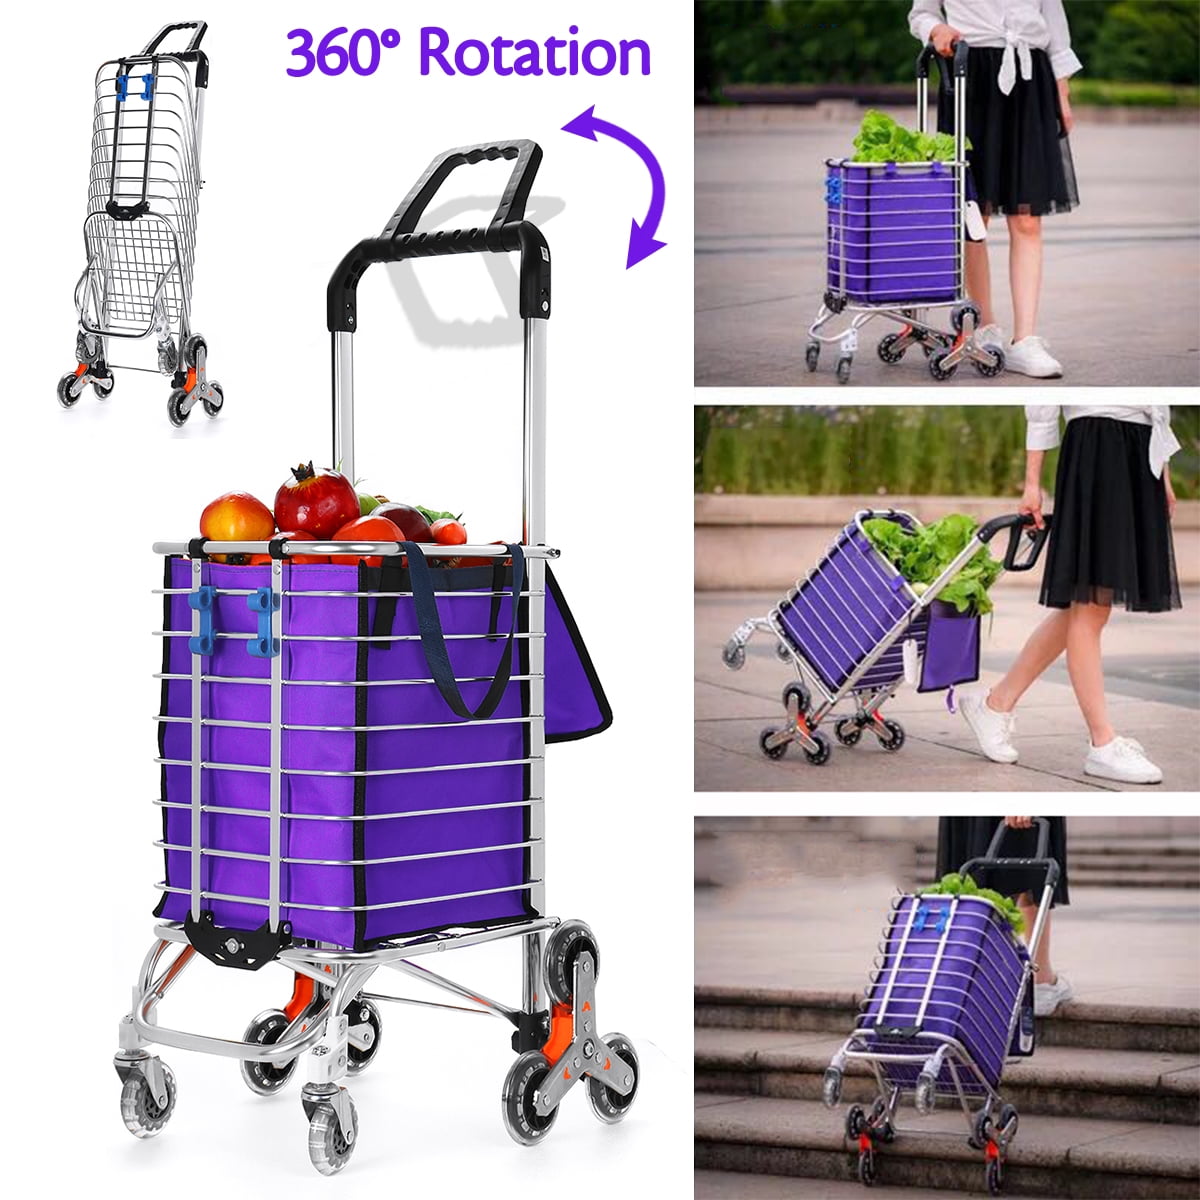 Yxsd Aluminum Climbing Stairs Shopping Cart with 2 Wheels Folding Trolley Color : Orange